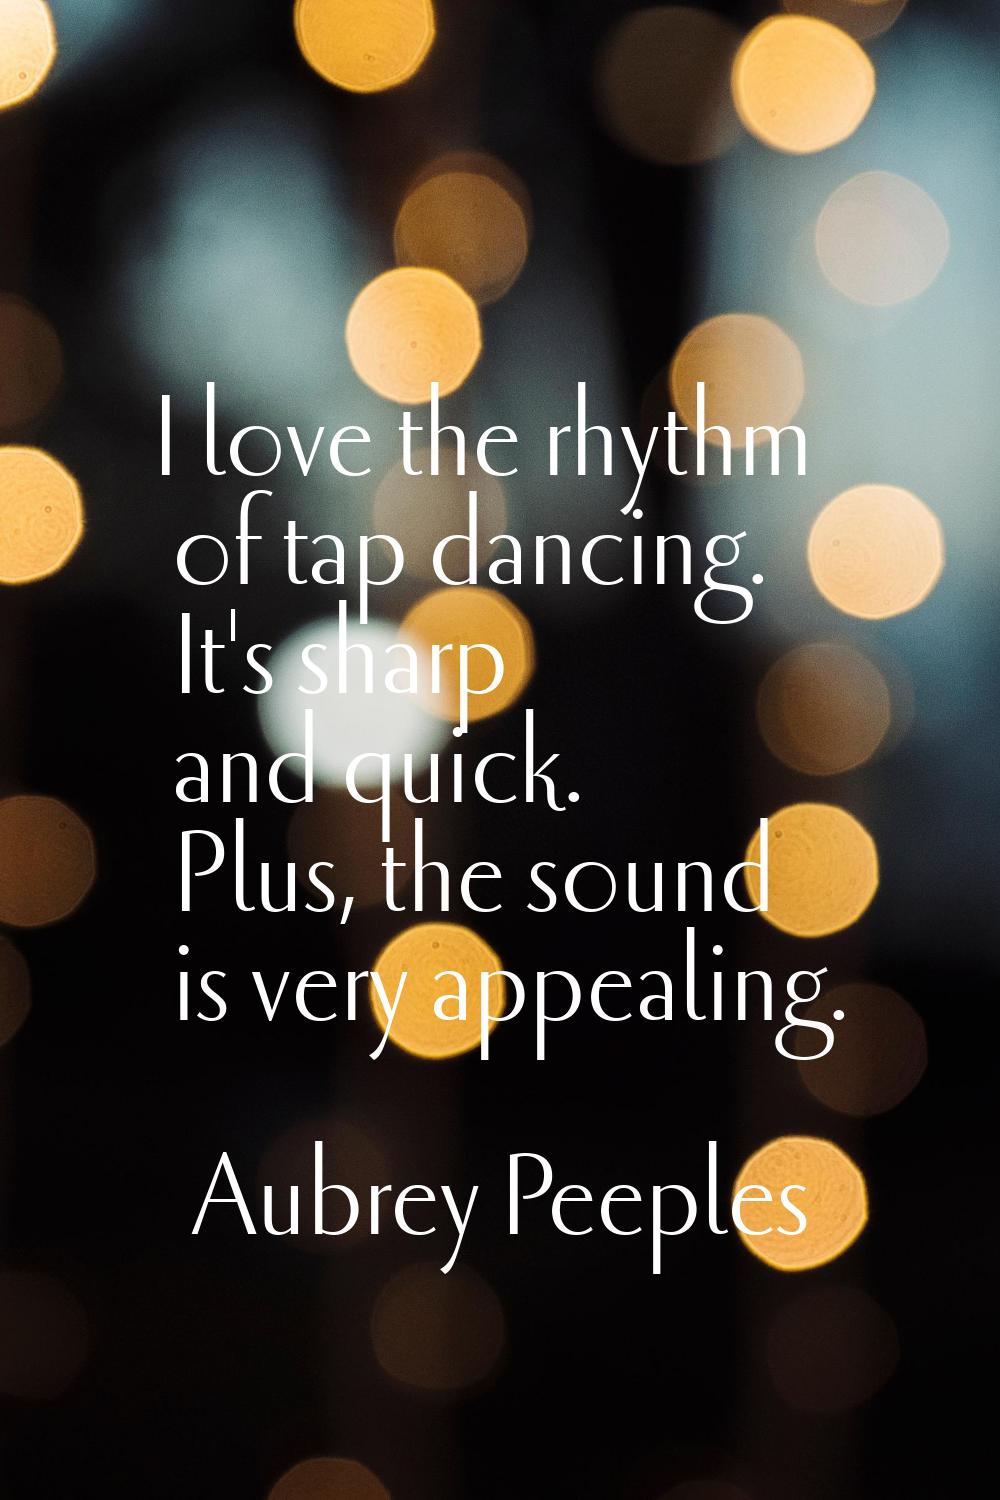 I love the rhythm of tap dancing. It's sharp and quick. Plus, the sound is very appealing.